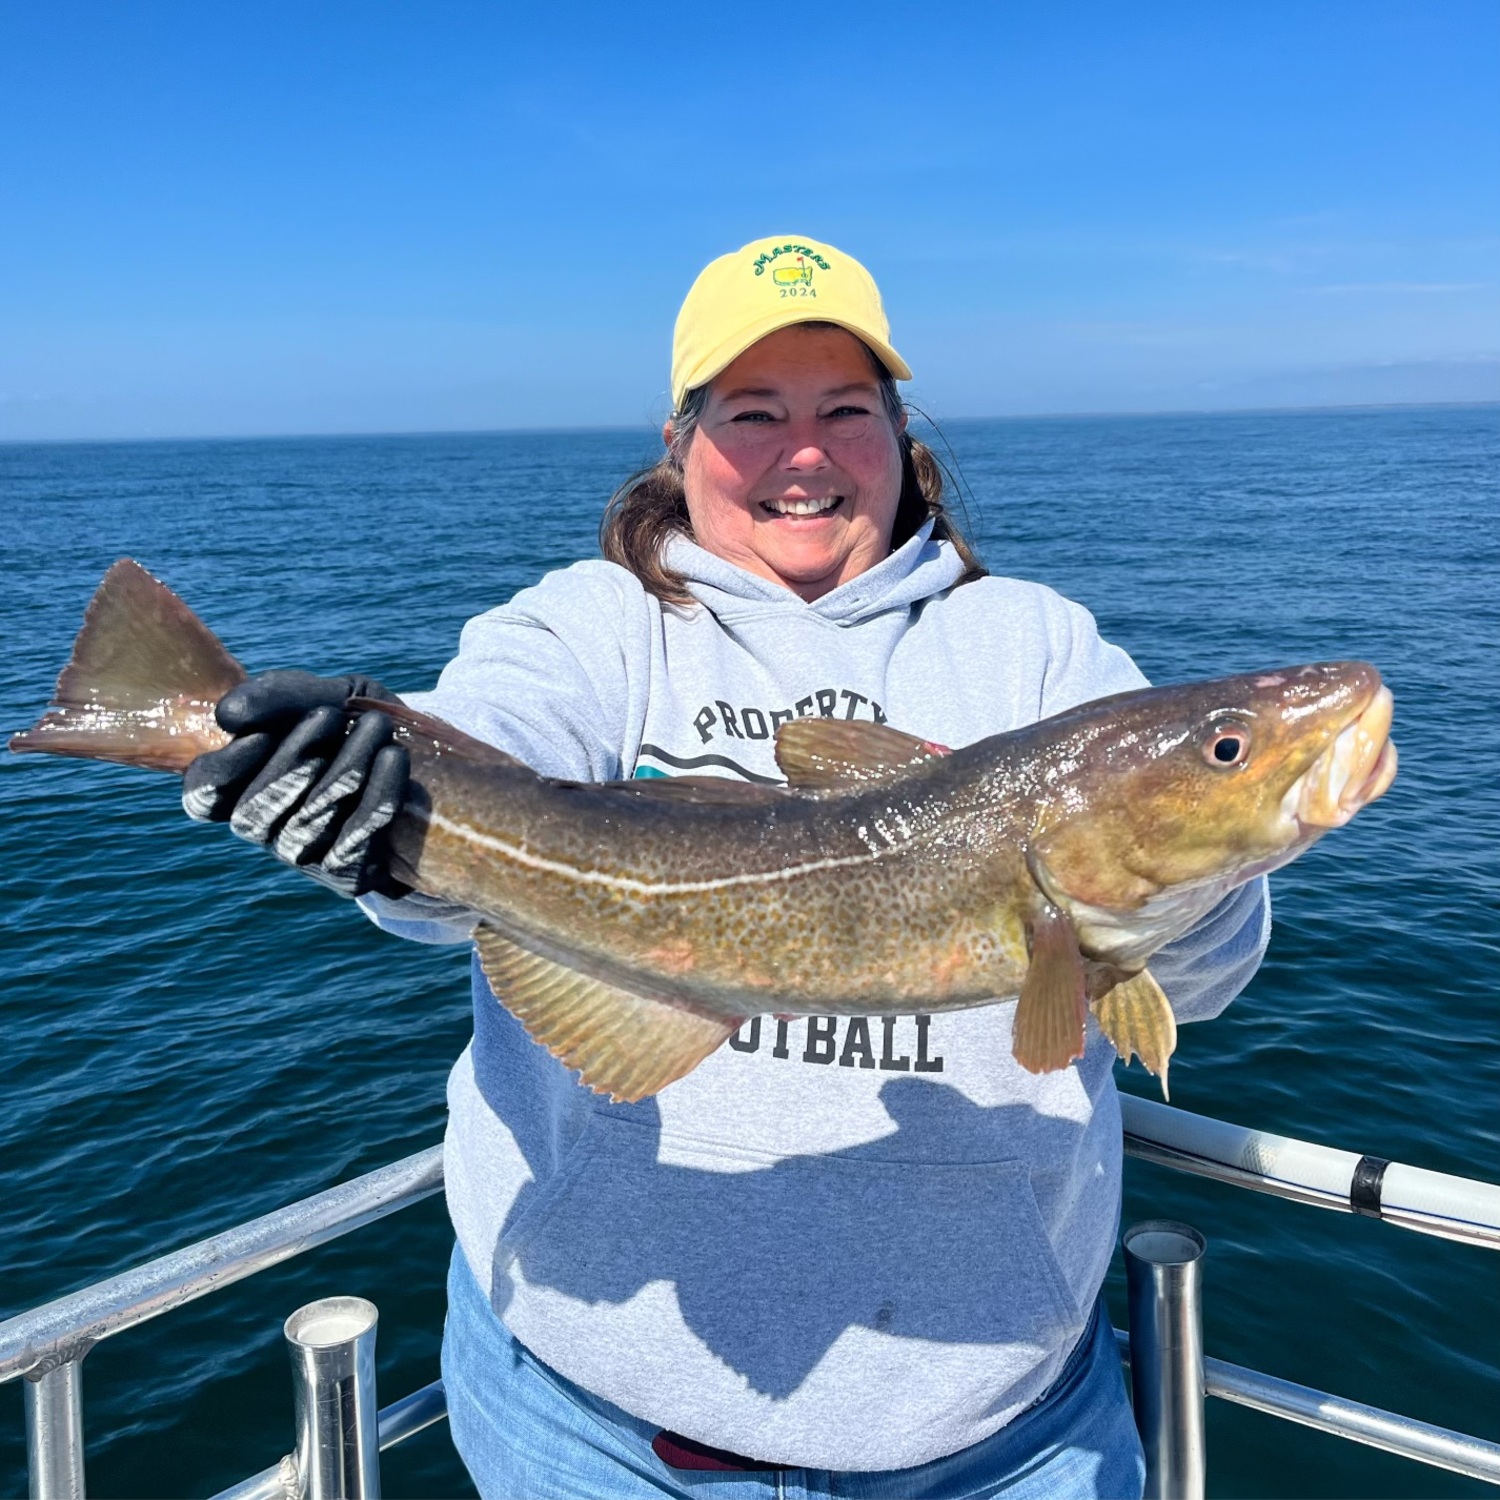 Jill Nesbit with a nice spring keeper cod caught aboard Montauk charter boat Double D on their first voyage of the year this week. CAPT. DAN GIUNTA